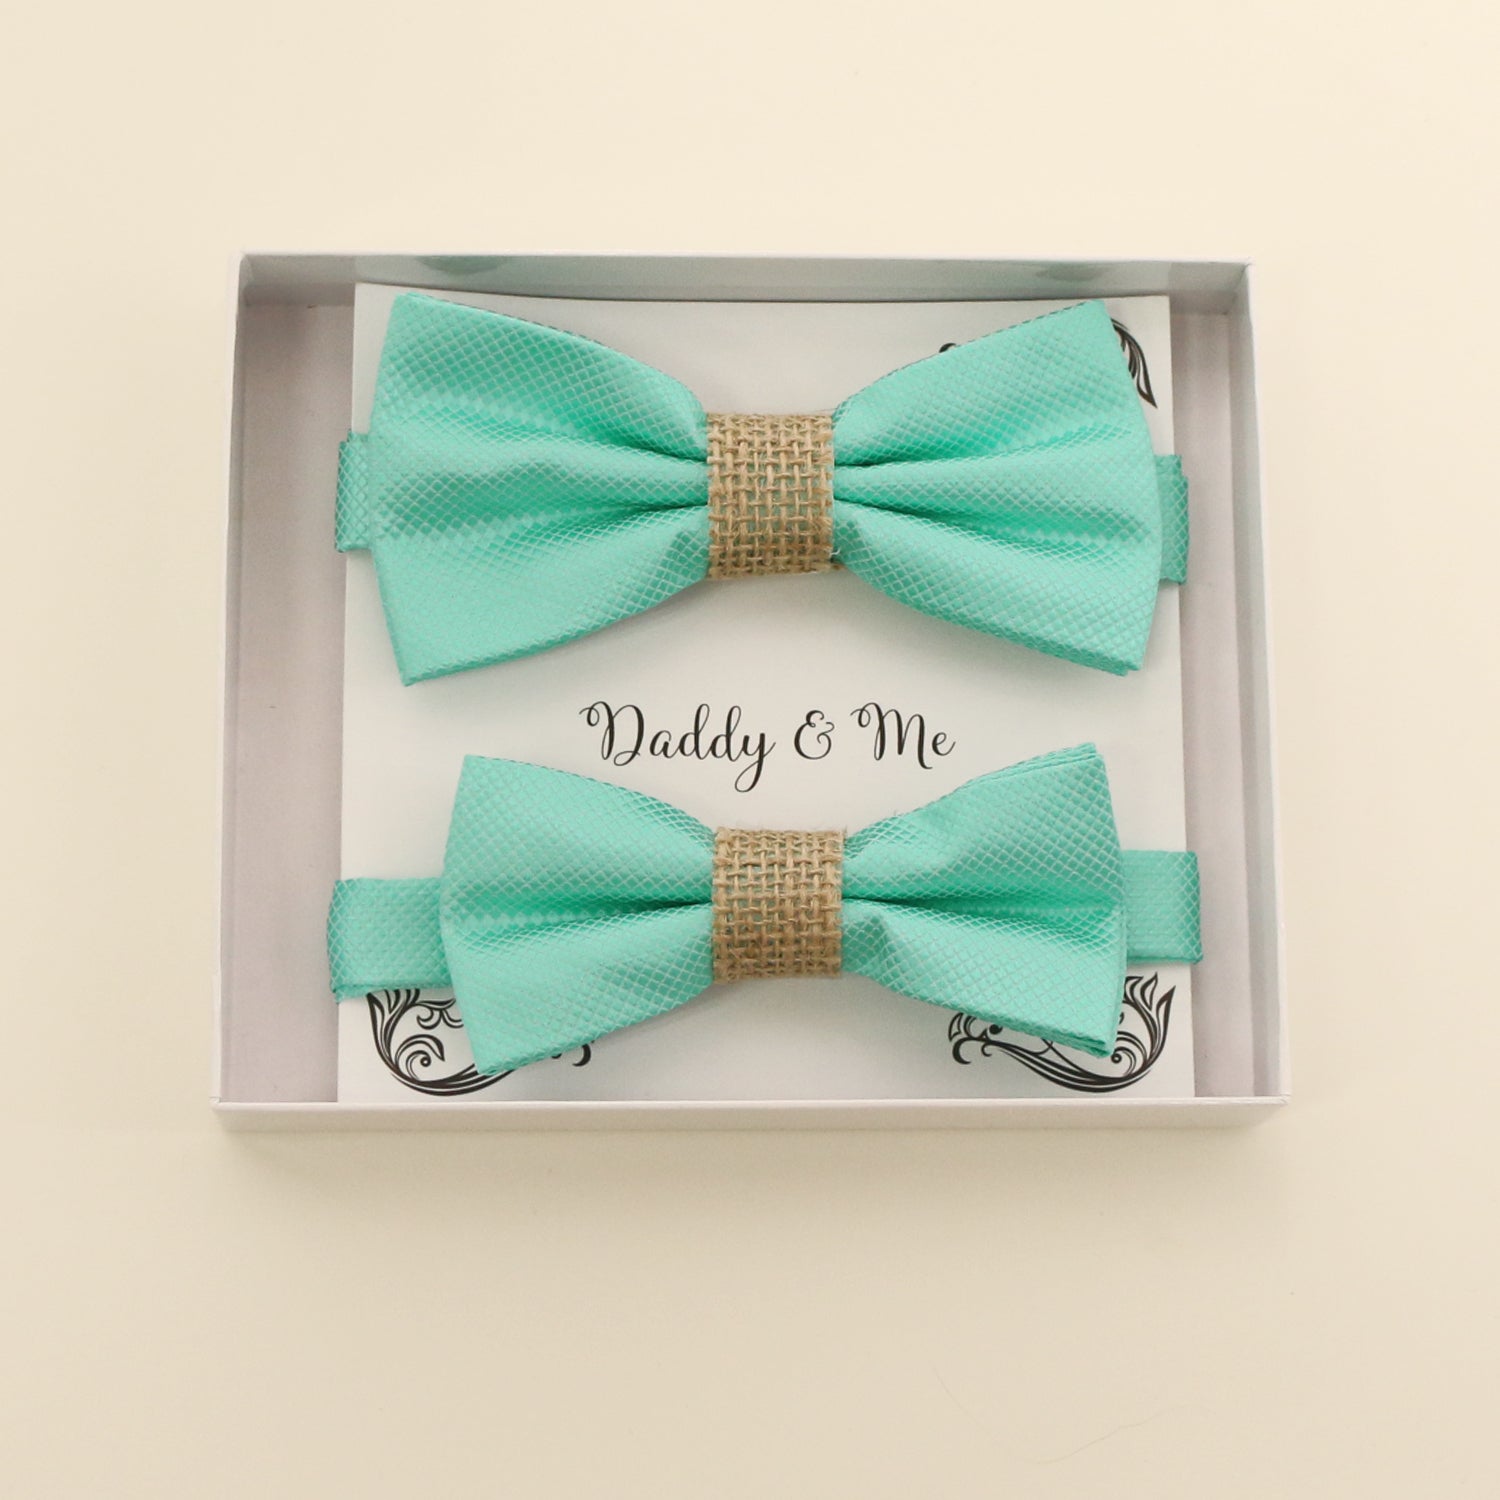 Turquoise burlap Bow tie set for daddy and son, Daddy me gift set, Grandpa and me, Father son match, turquoise kids Toddler bow, handamde